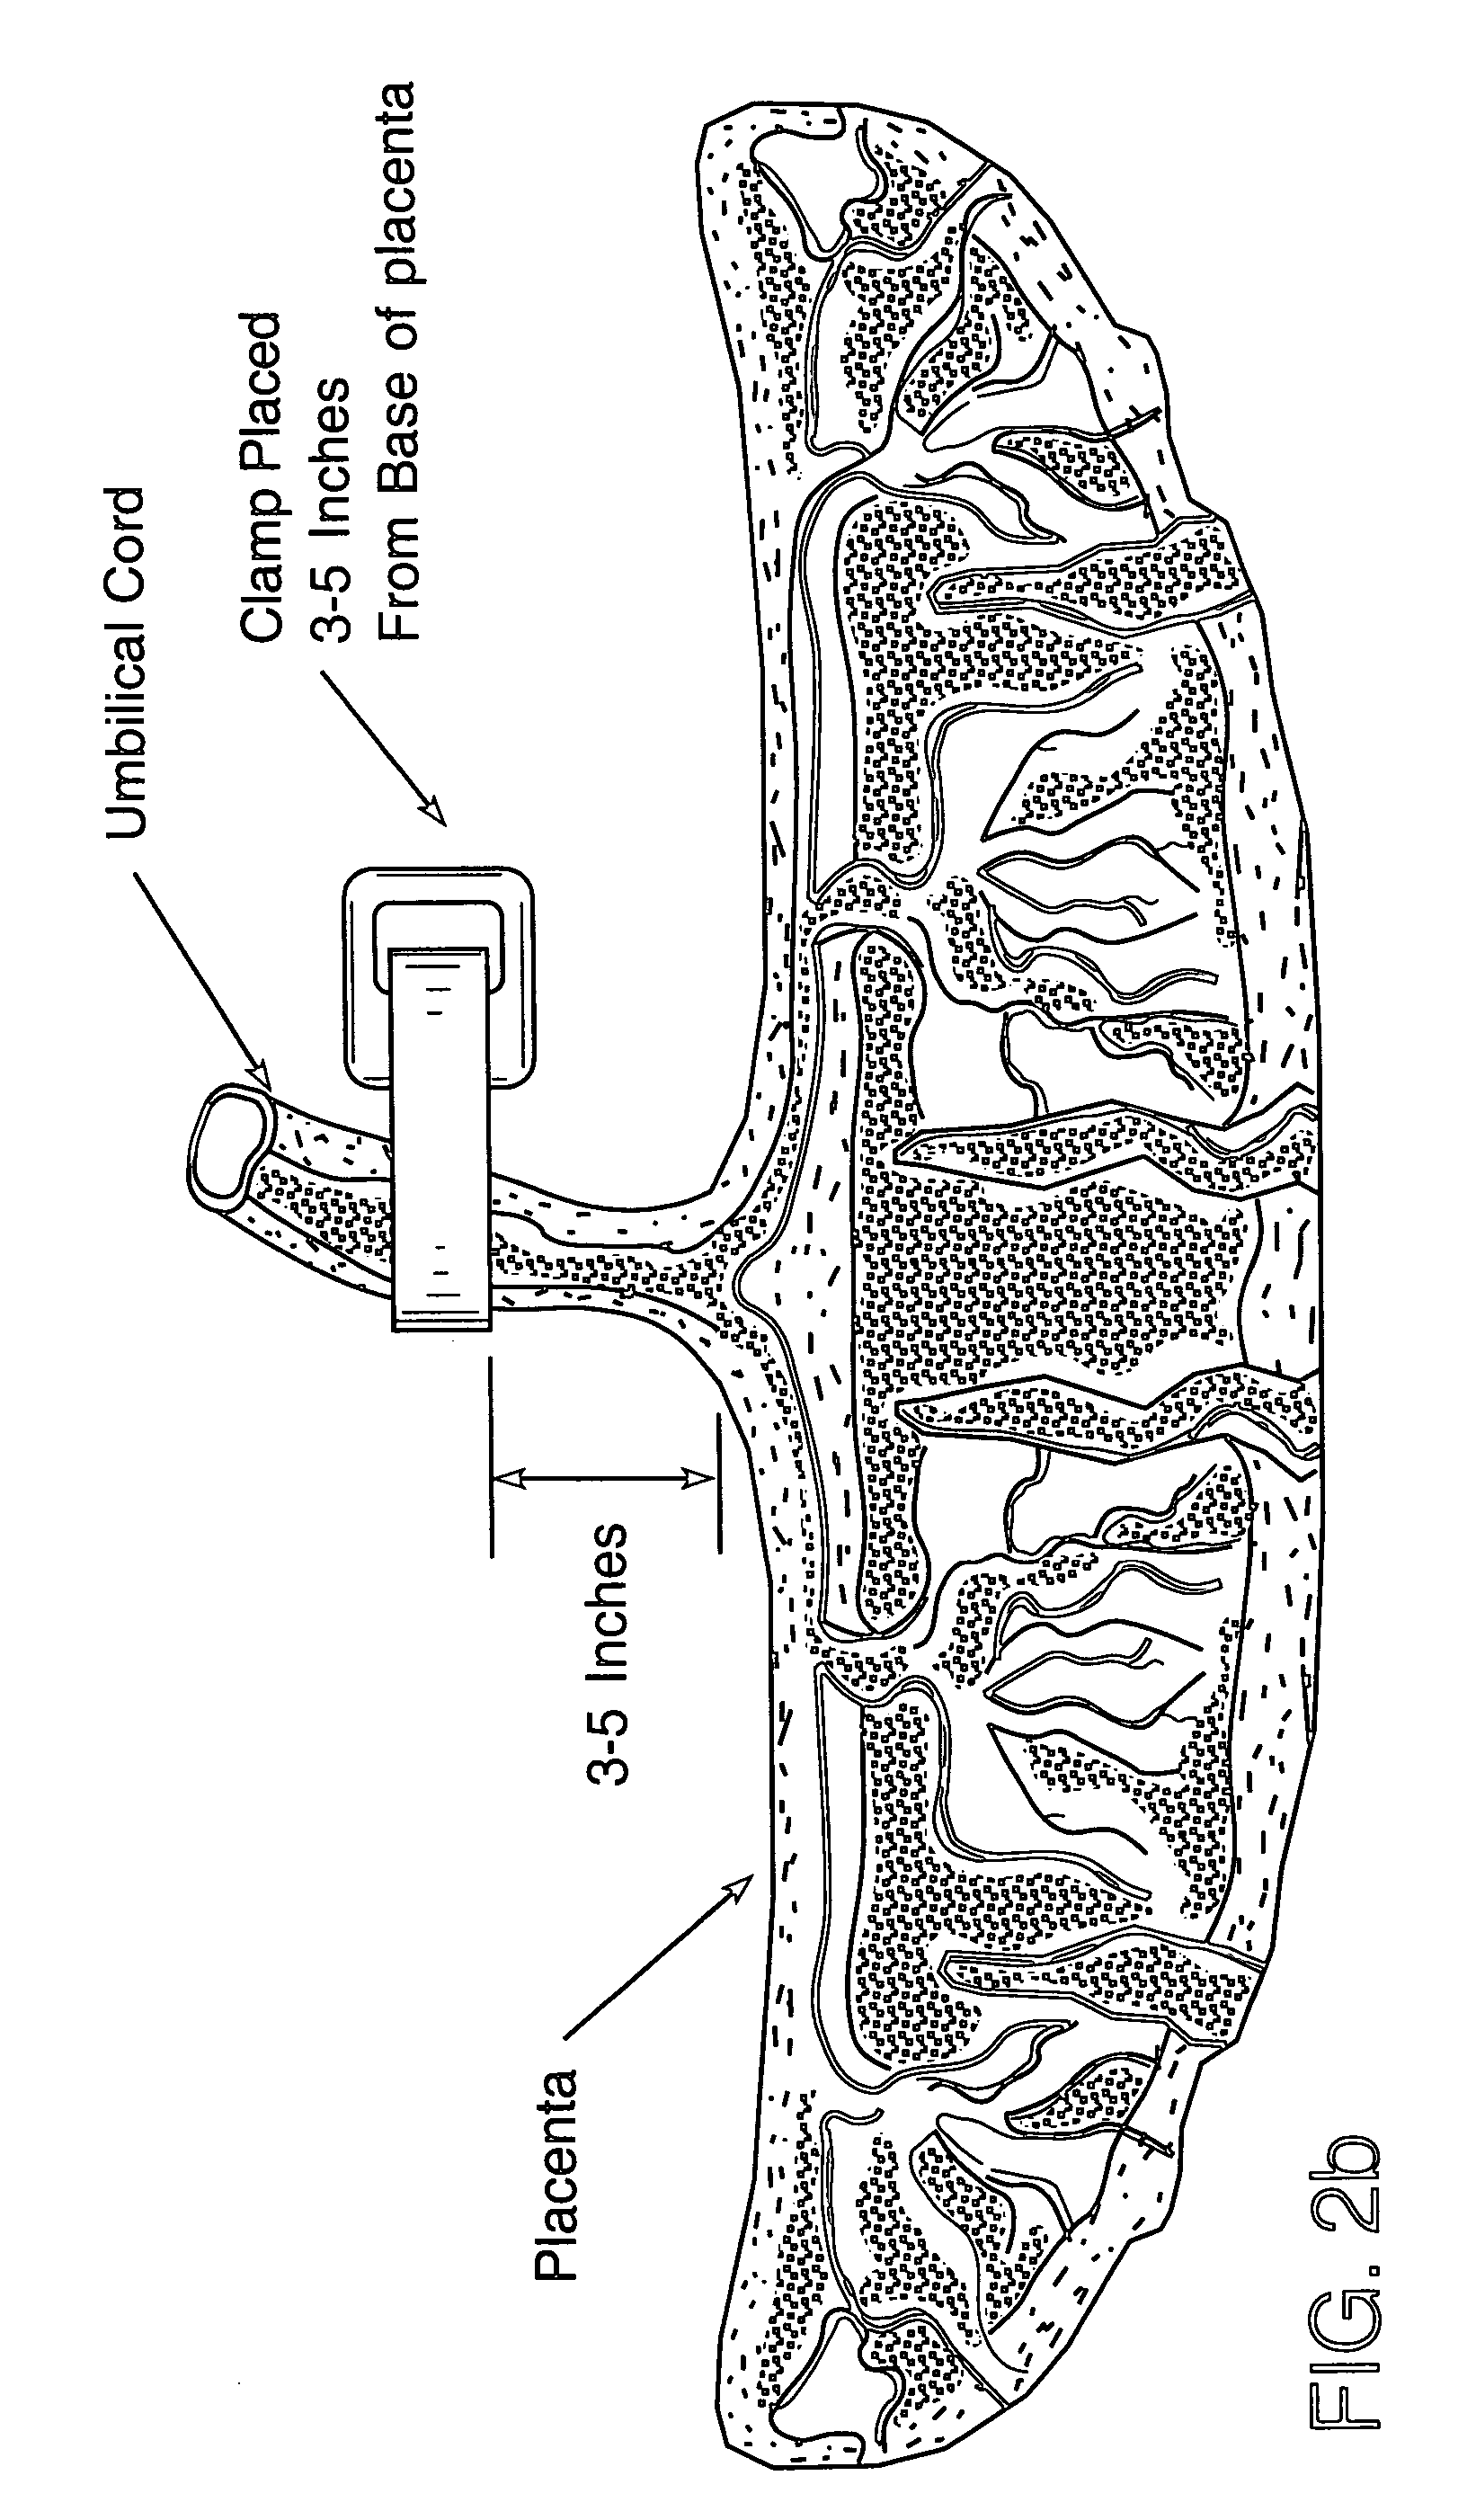 Method of collecting placental stem cells